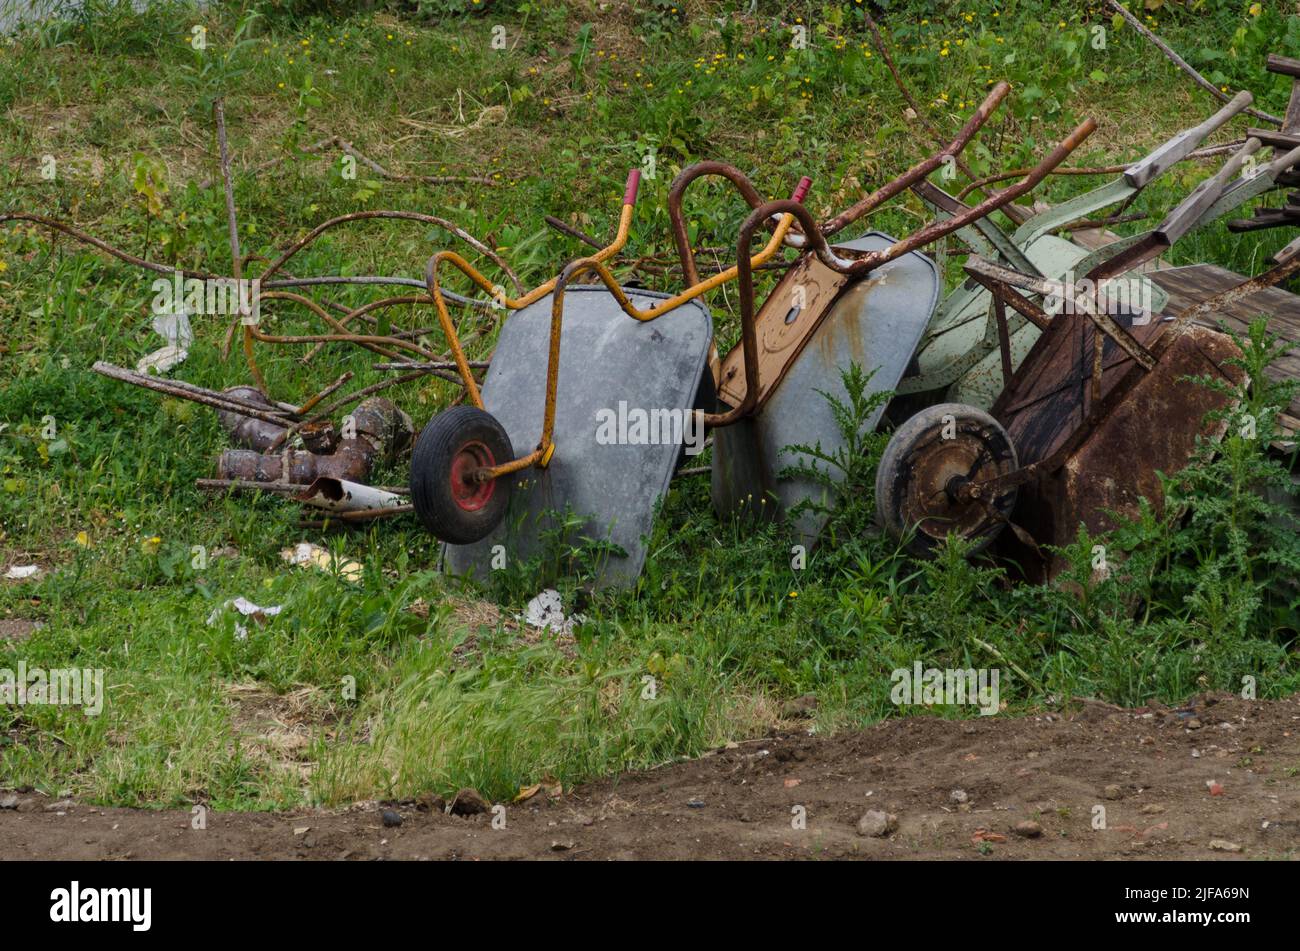 Unauthorized dumping of wheelbarrows and metal scrap Stock Photo